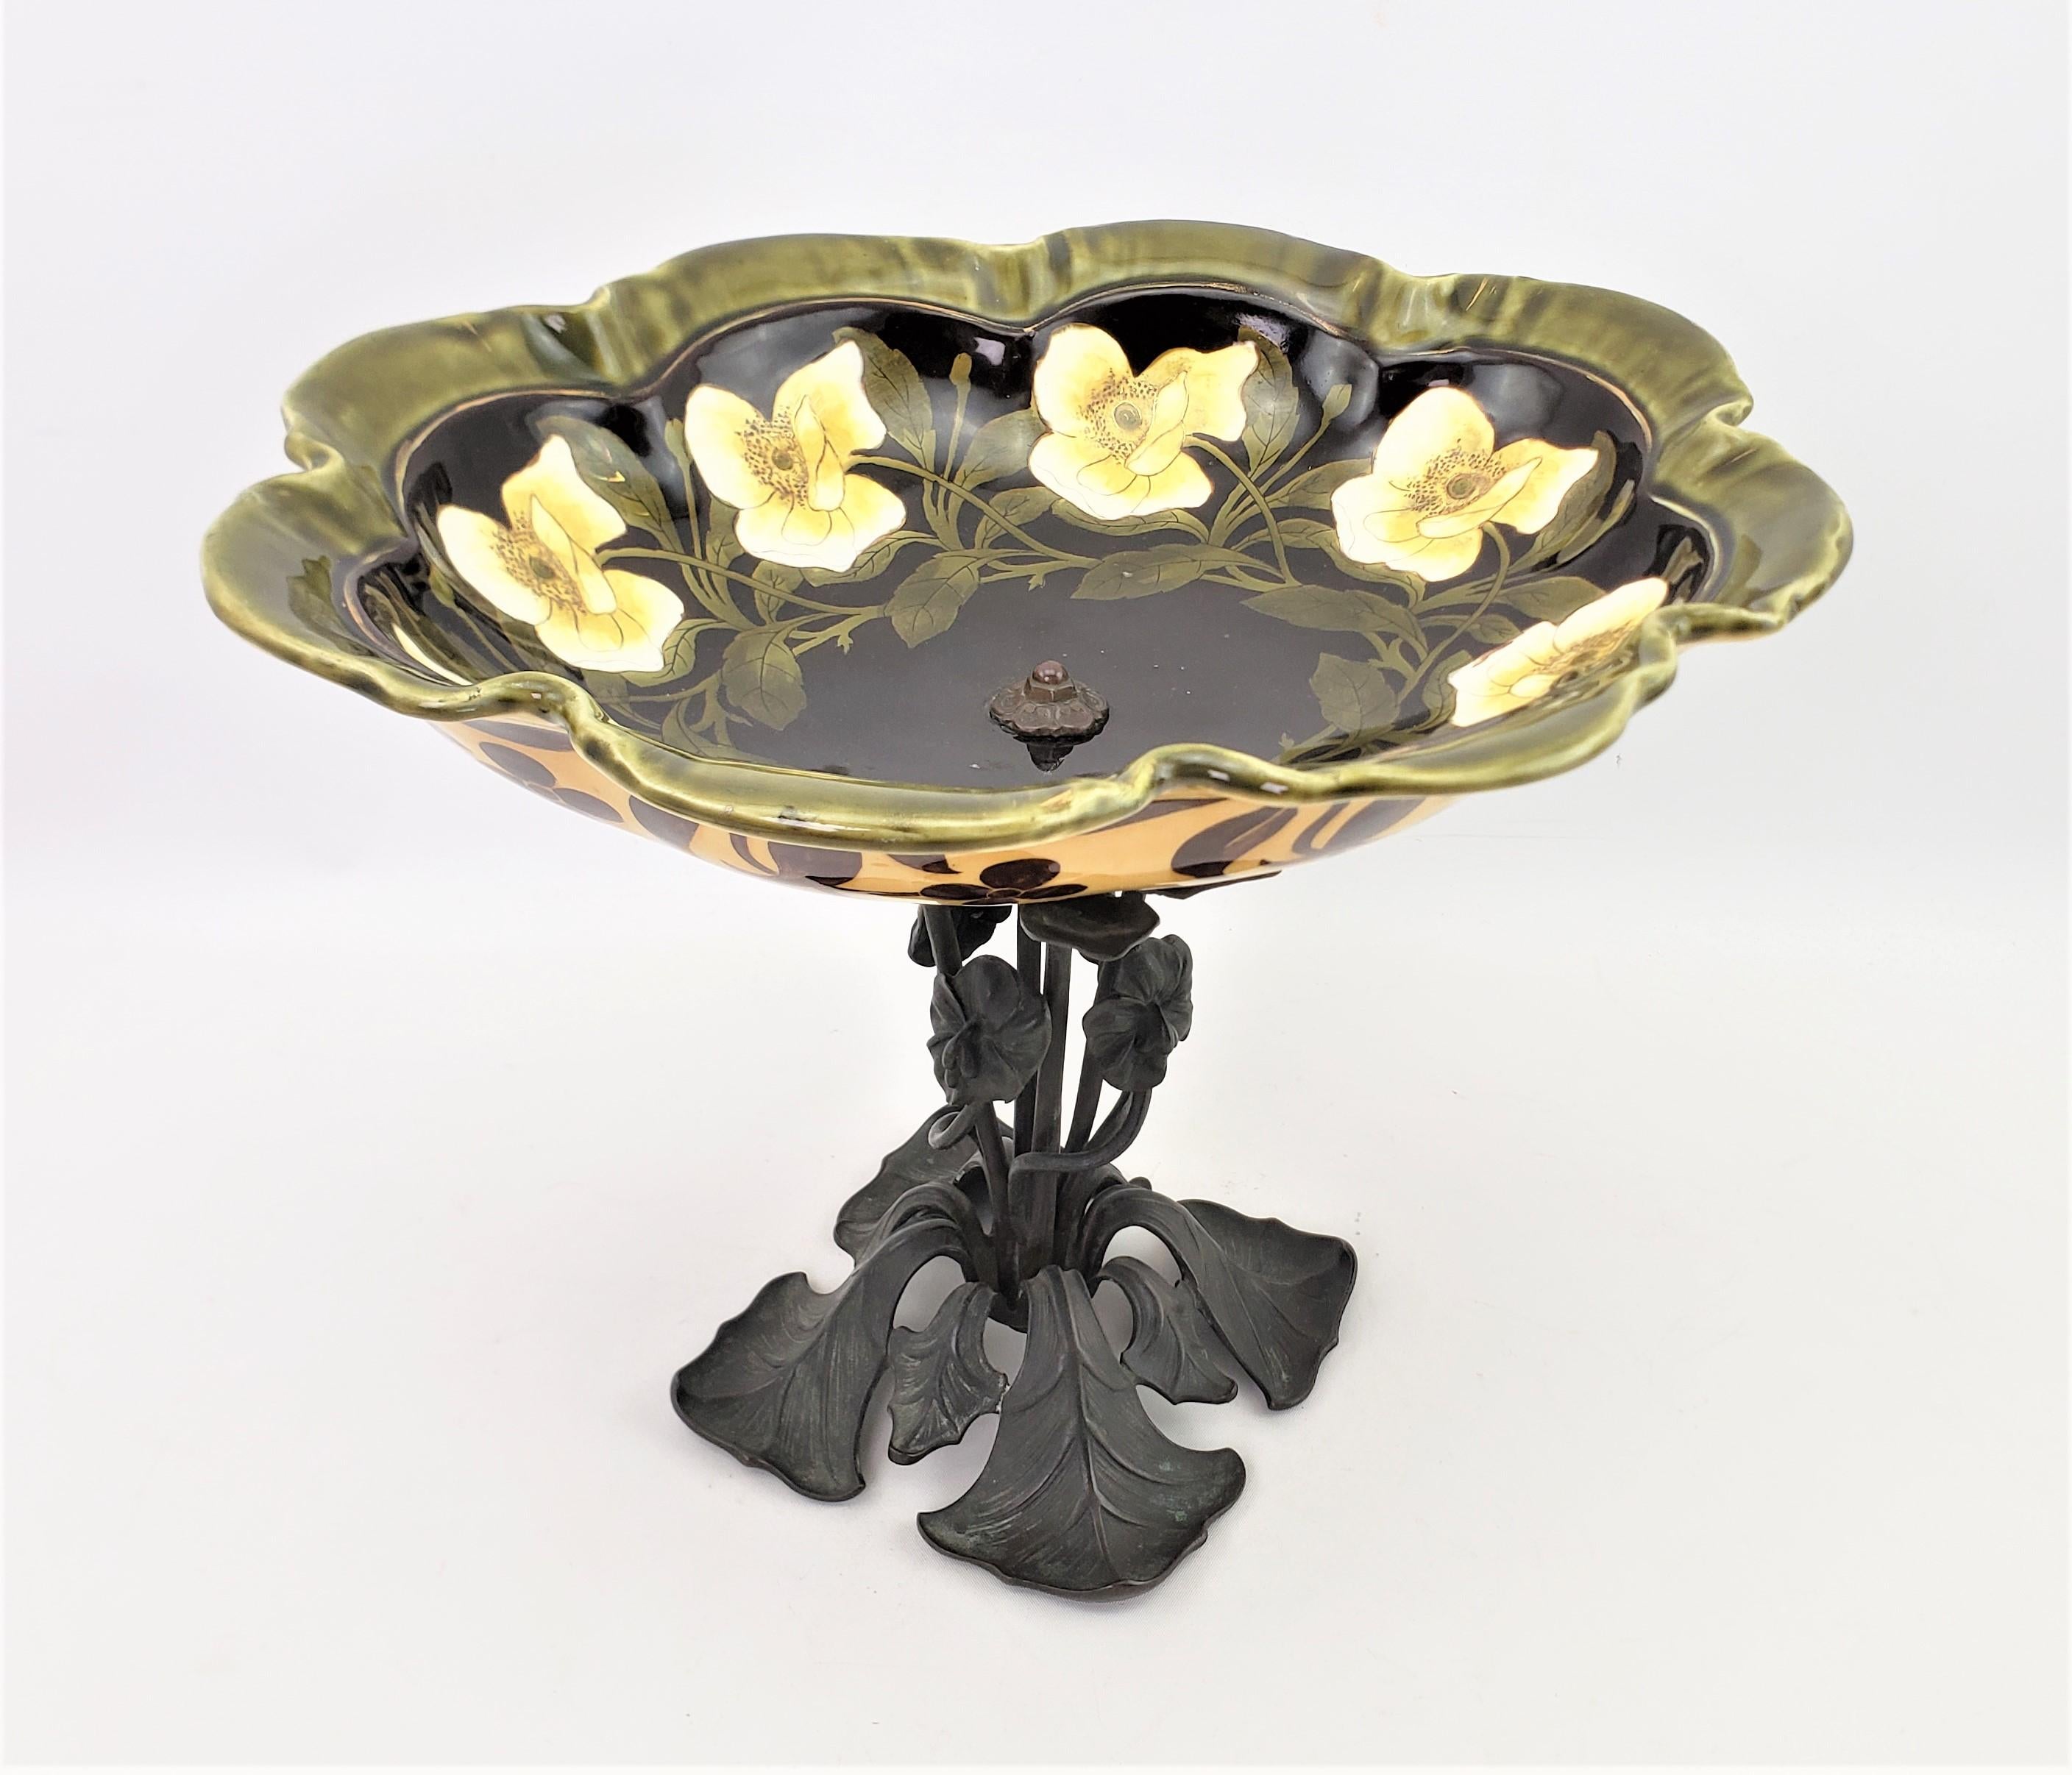 This antique cast bronze and ceramic pedestal bowl or centerpiece is unsigned, but presumed to originate from Austria and dating to approximately 1900 and done in the period Art Nouveau style. The bowl itself is done with an oval shape and scalloped